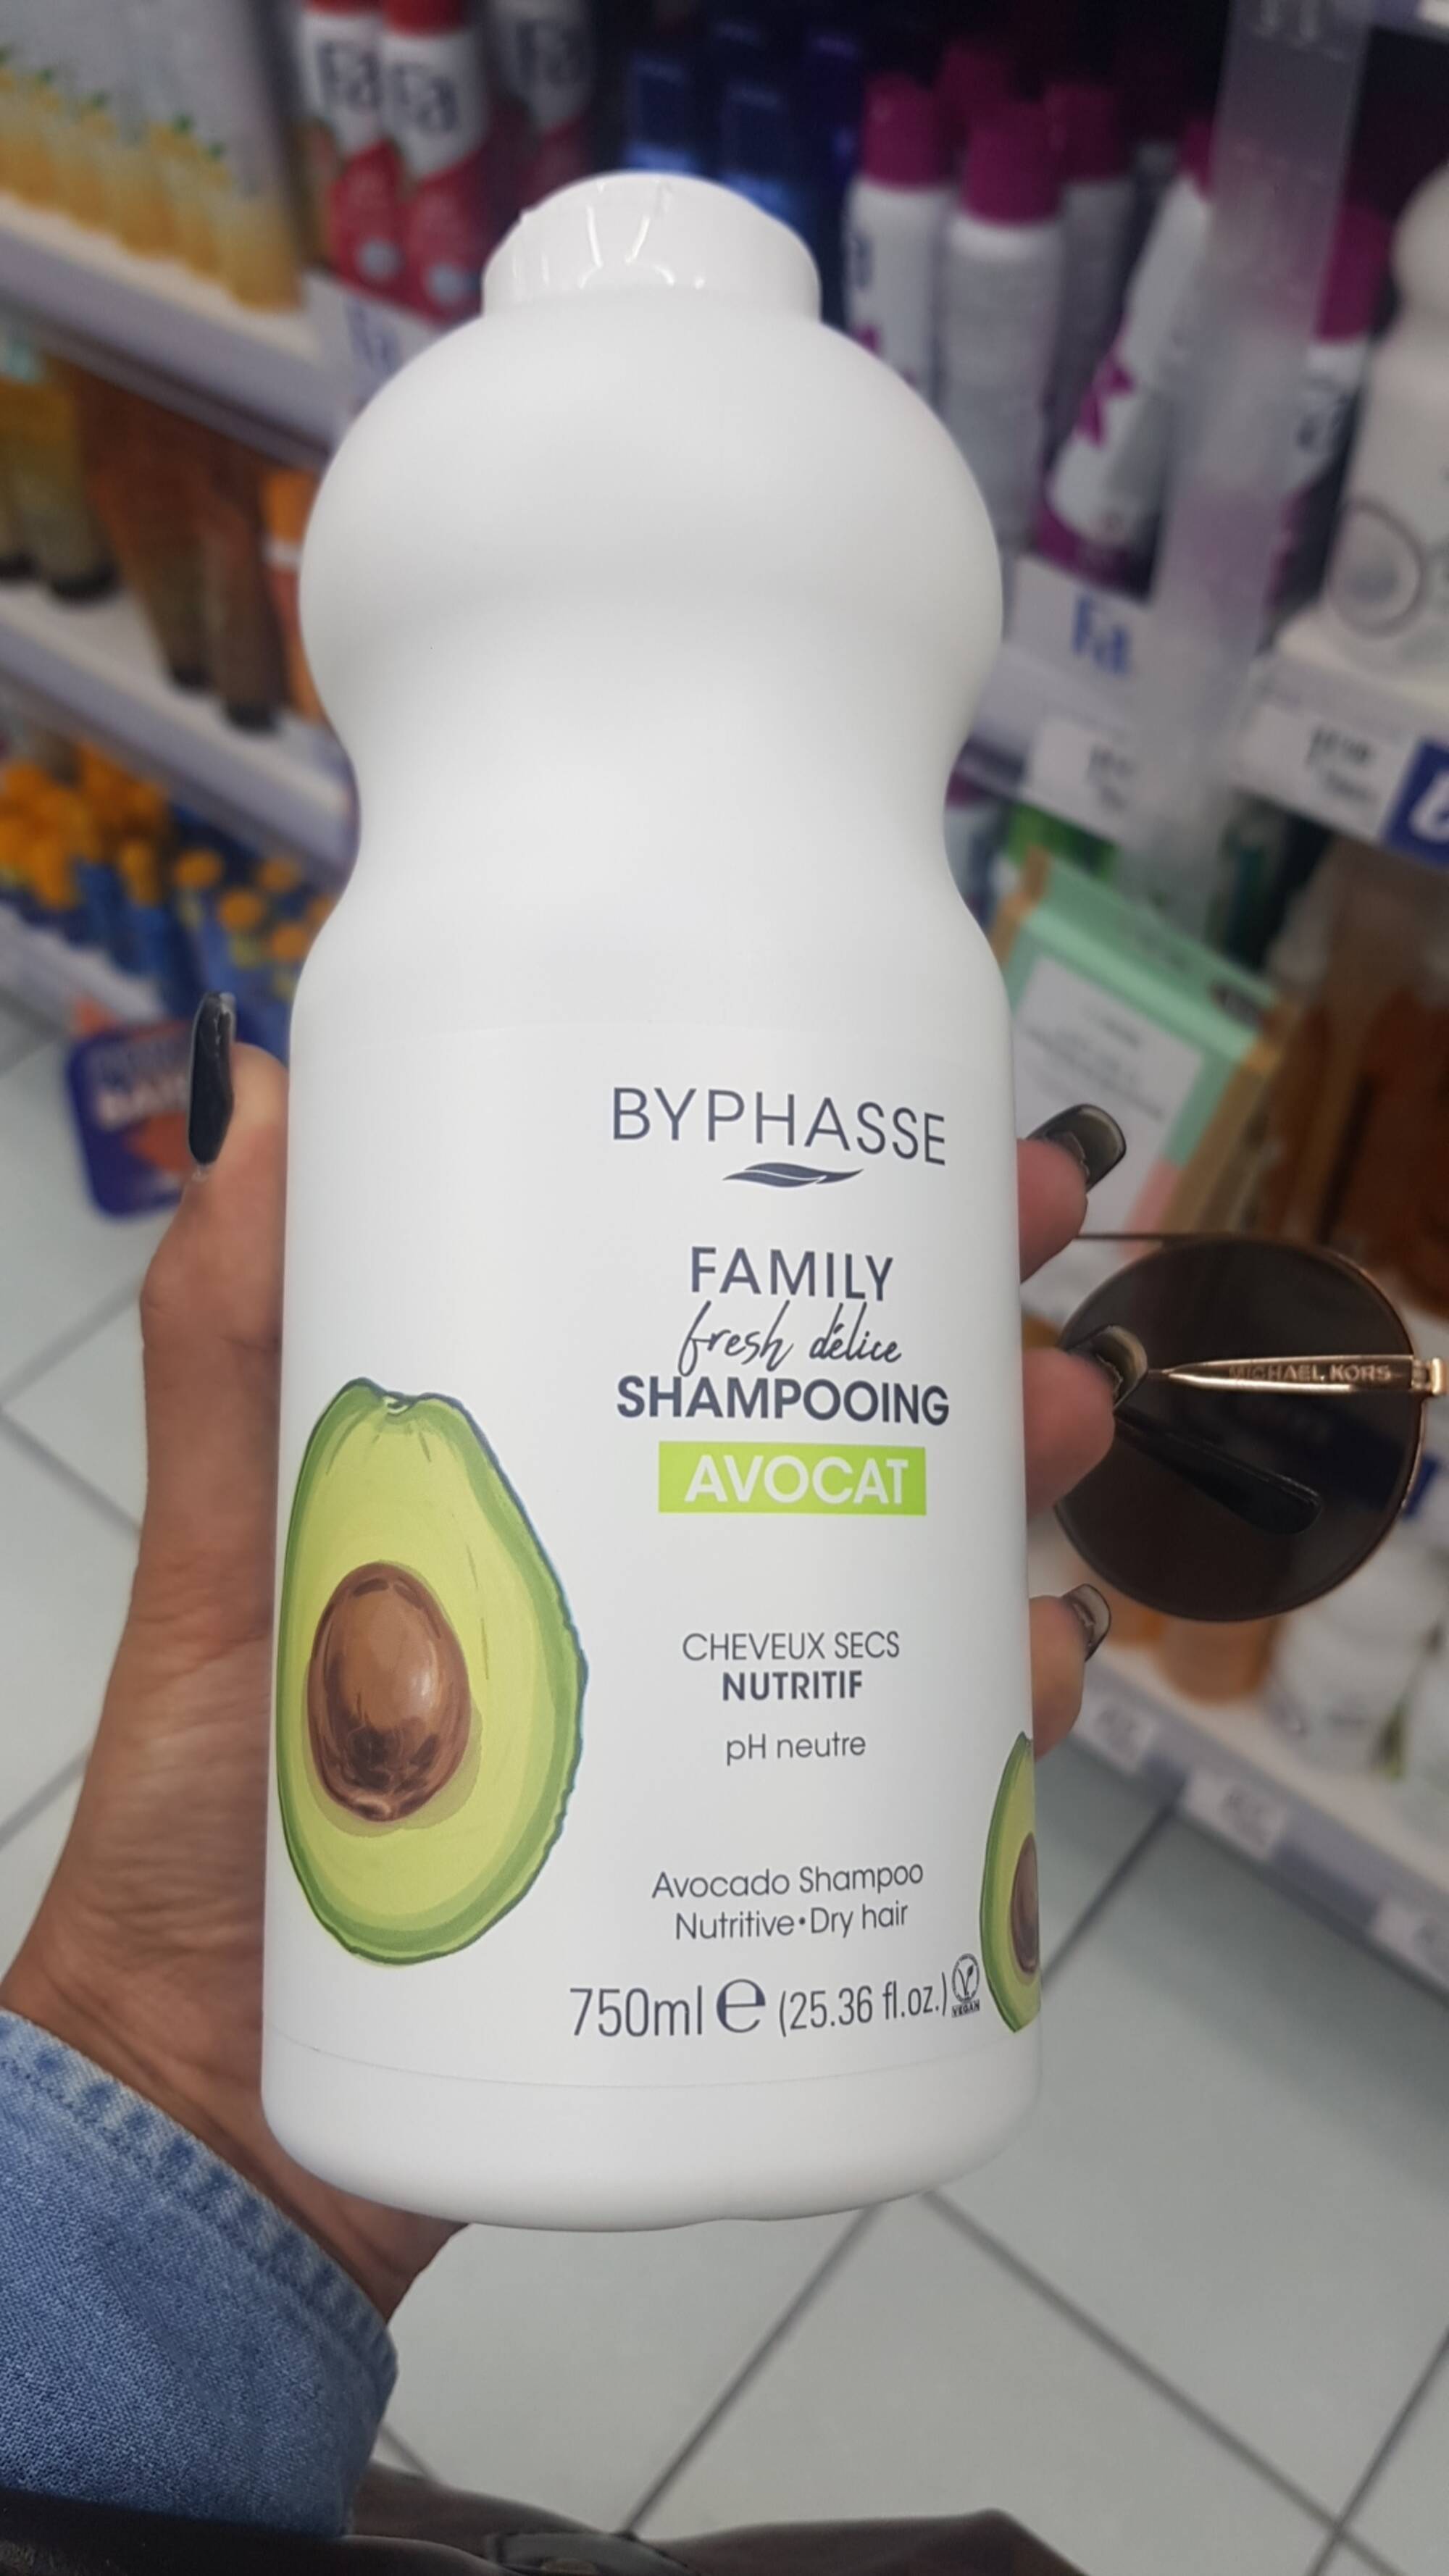 BYPHASSE - Cheveux secs nutritif - Shampooing avocat